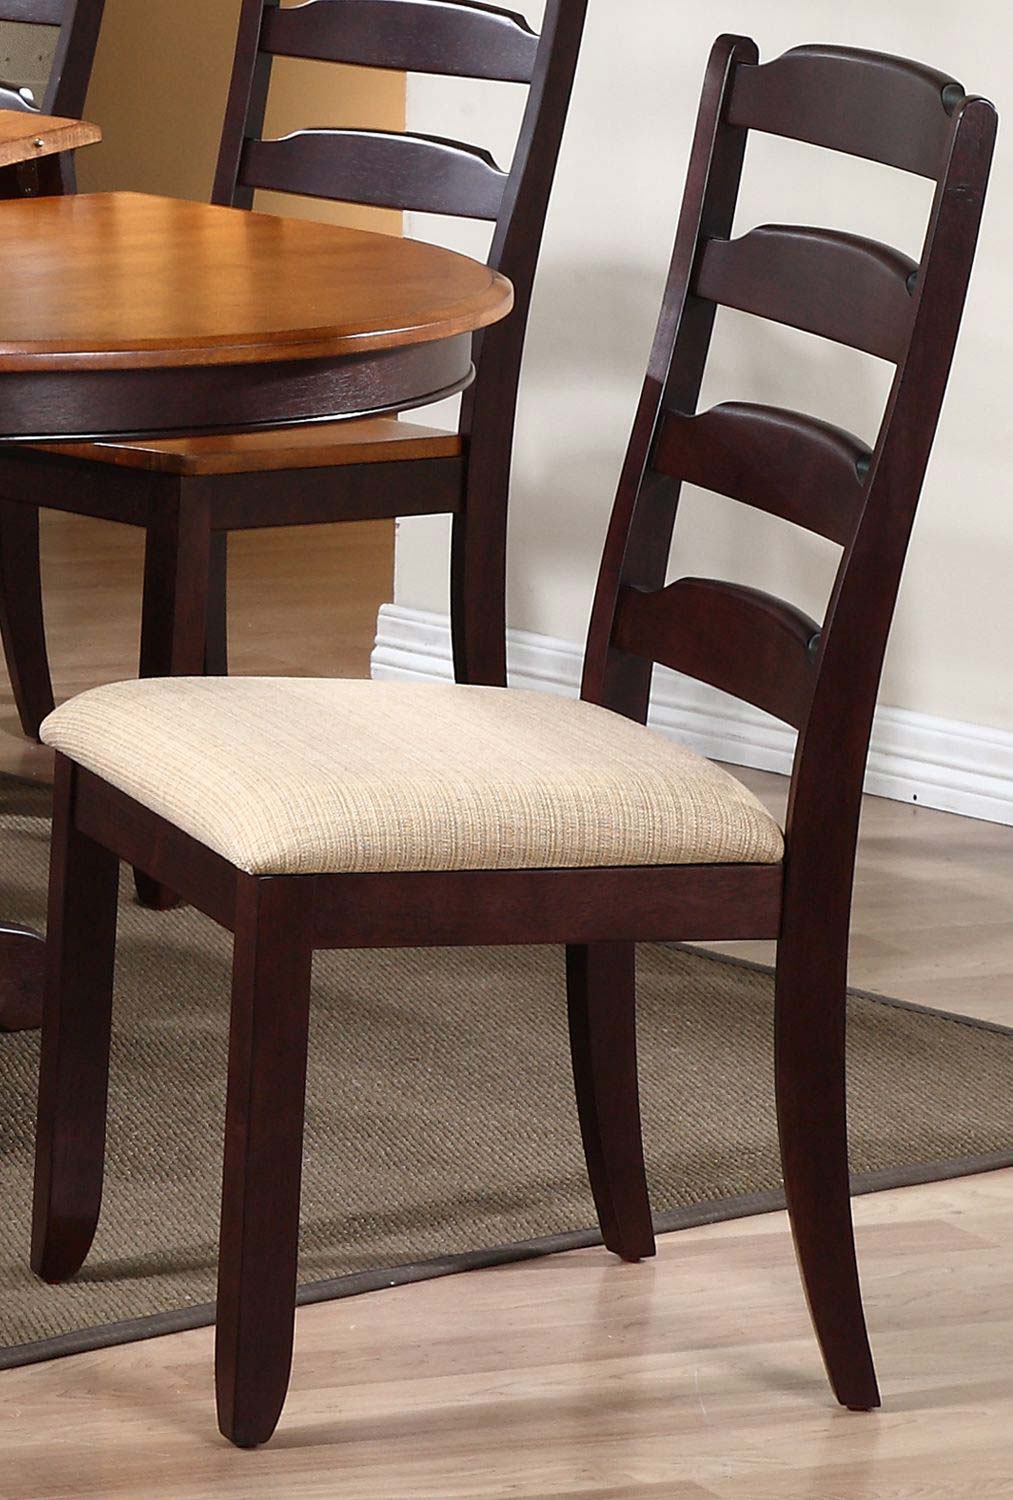 Iconic Furniture Ladder Back Dining Chair with Upholstered seat - Mocha